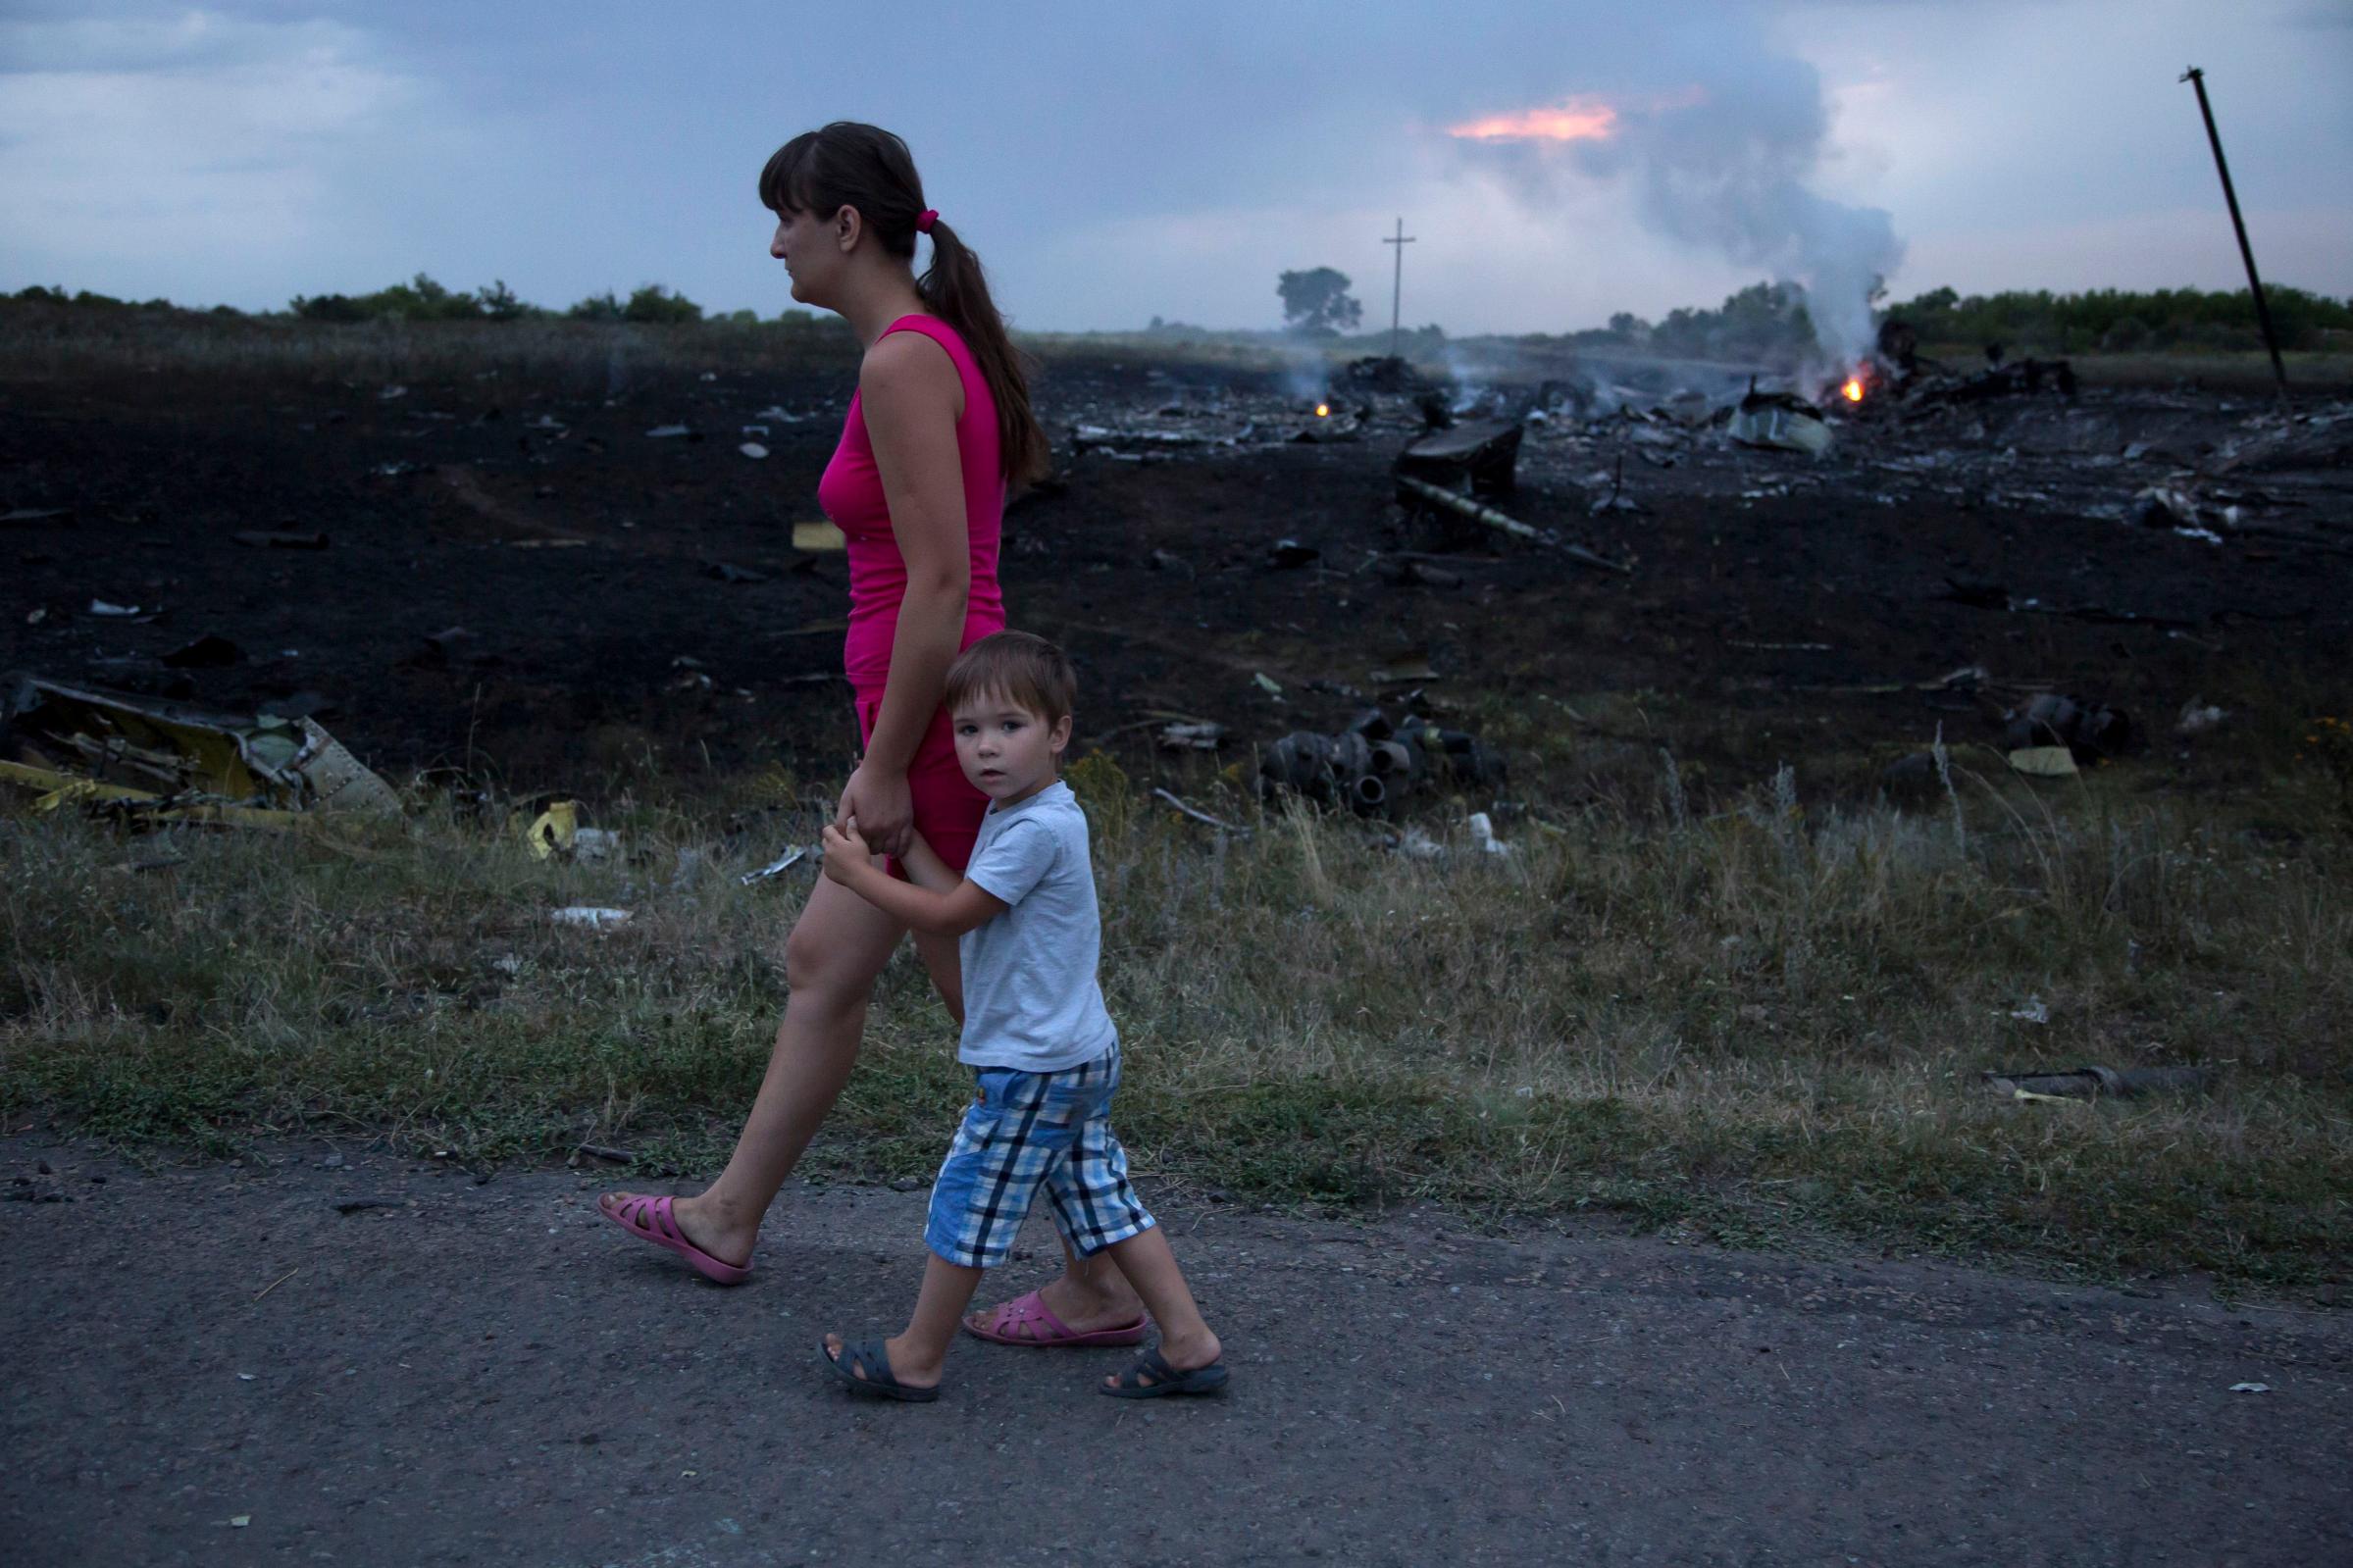 A woman and child walk past the crash site of a passenger plane near the village of Grabovo, Ukraine on Thursday, July 17, 2014.